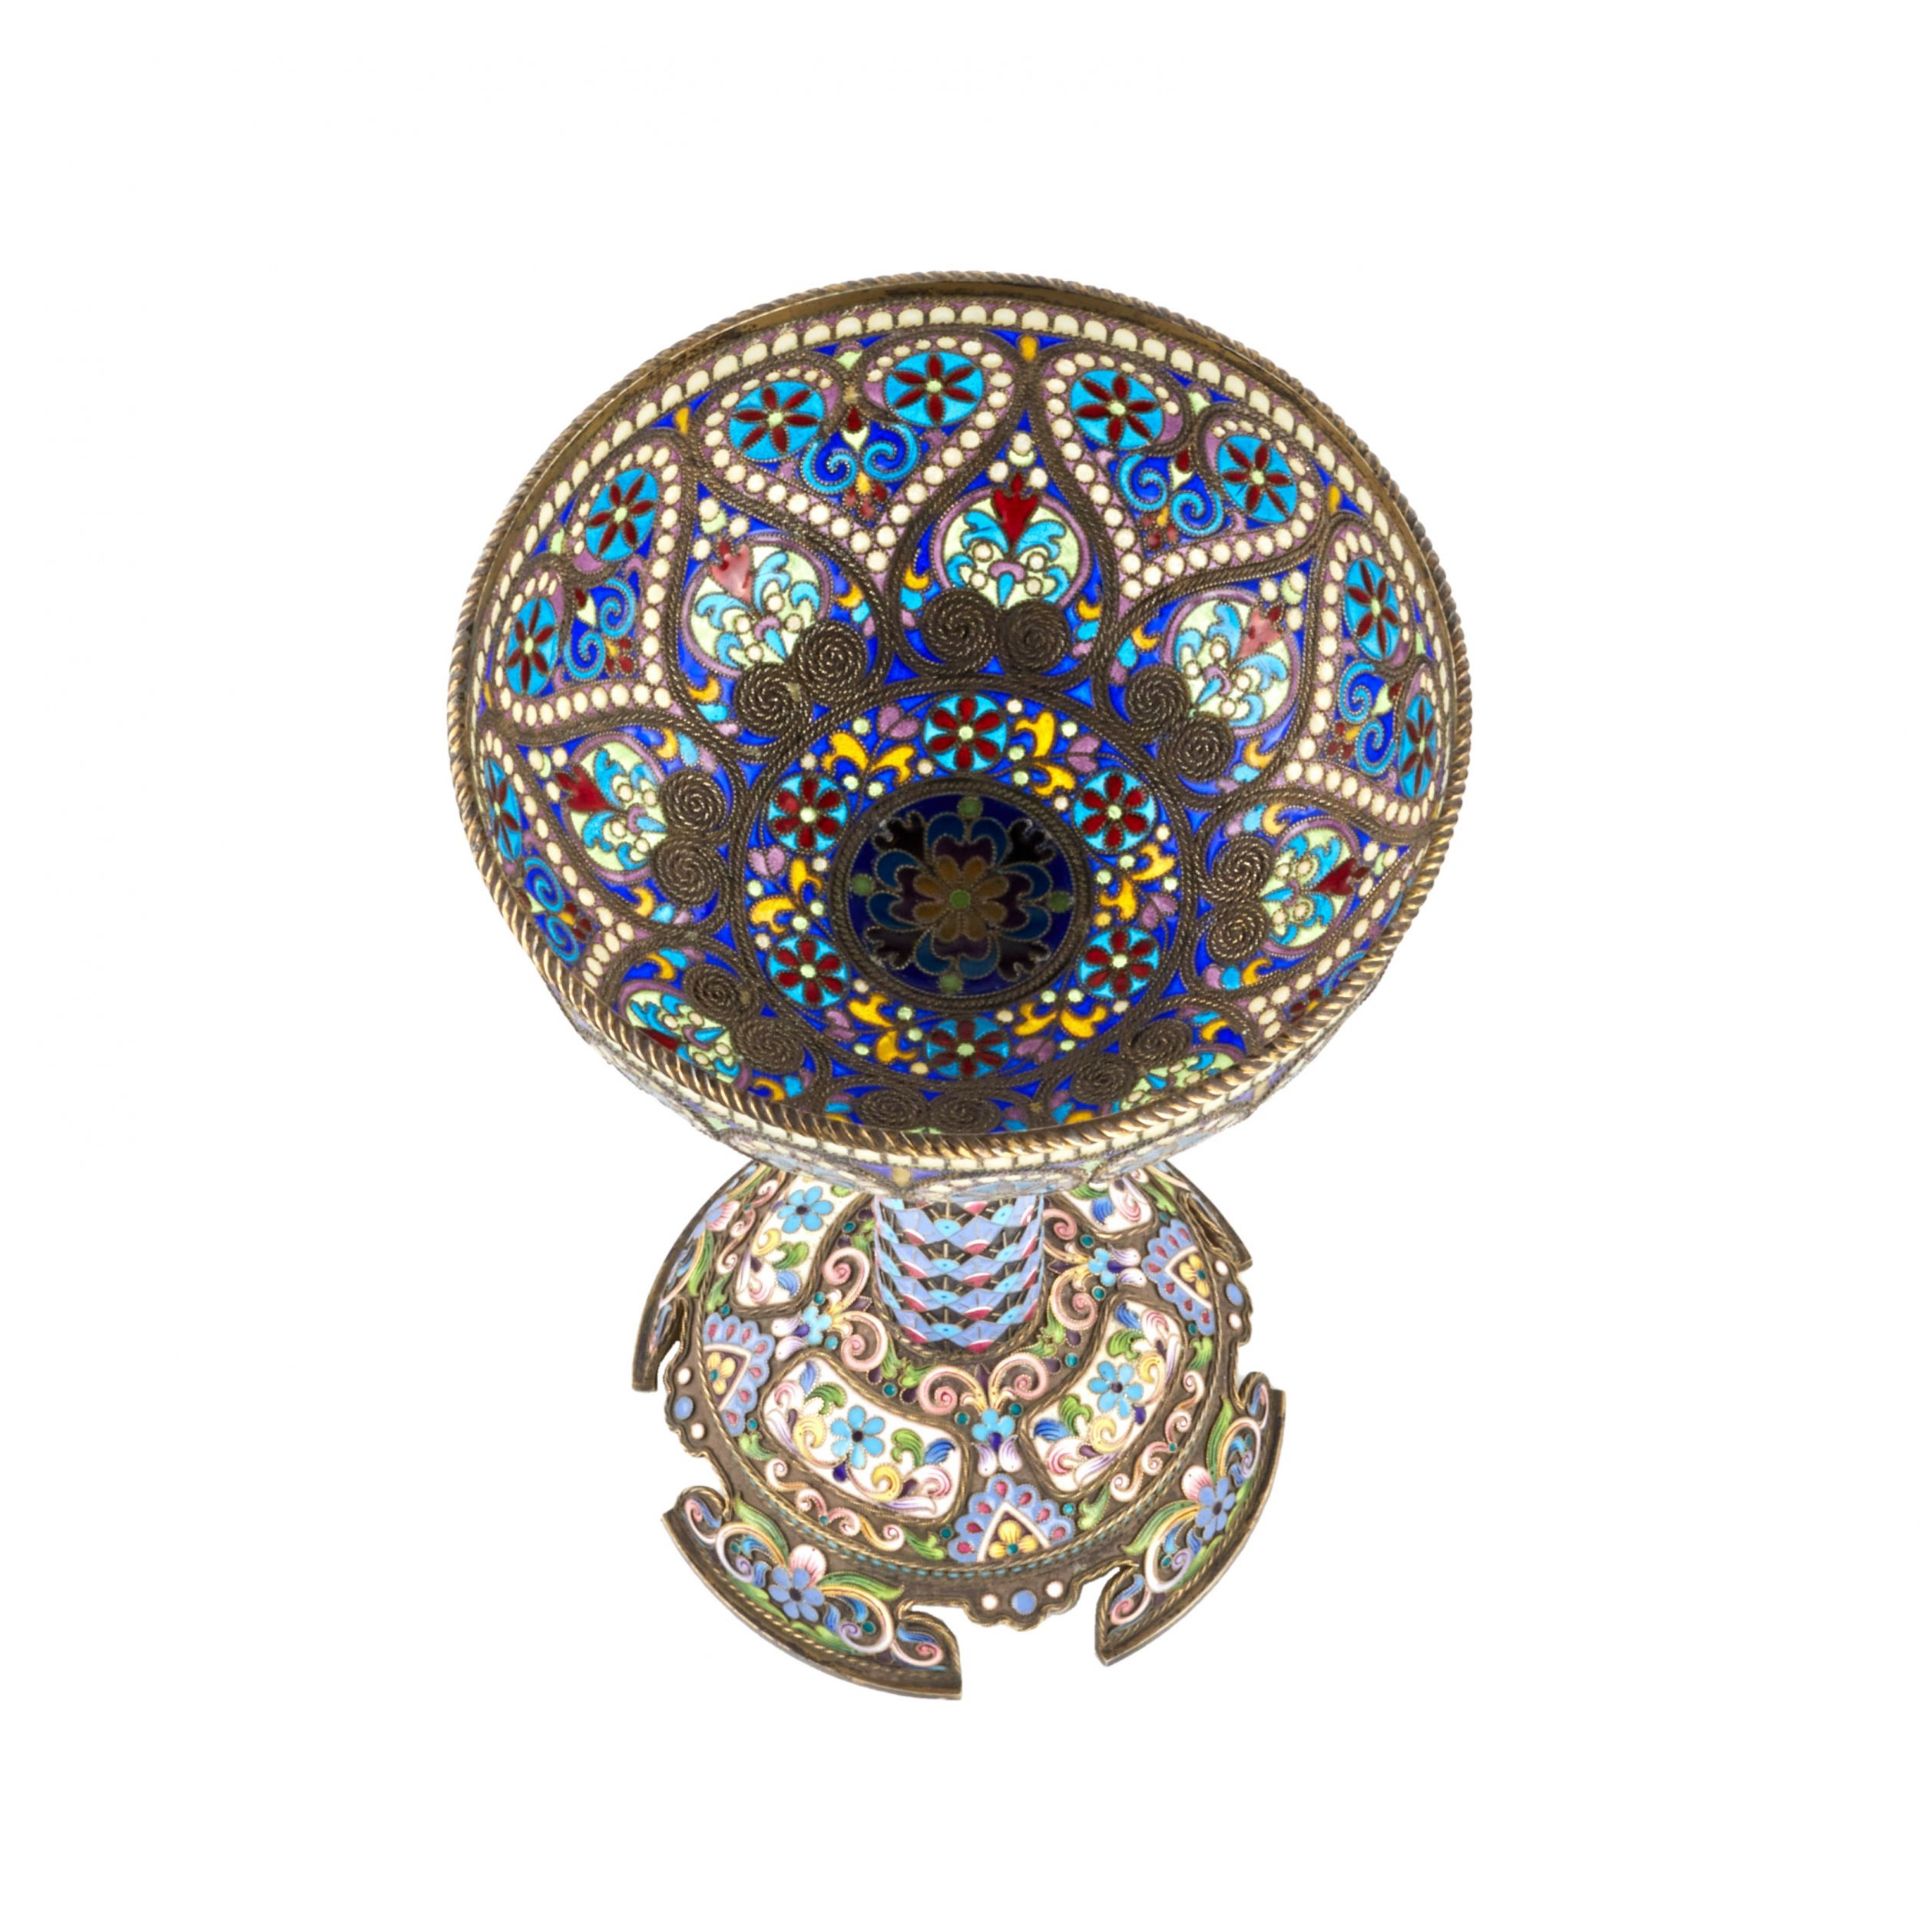 The magnificent silver goblet of Ivan Khlebnikov: painted, cloisonne, and stained glass enamels. - Image 3 of 6